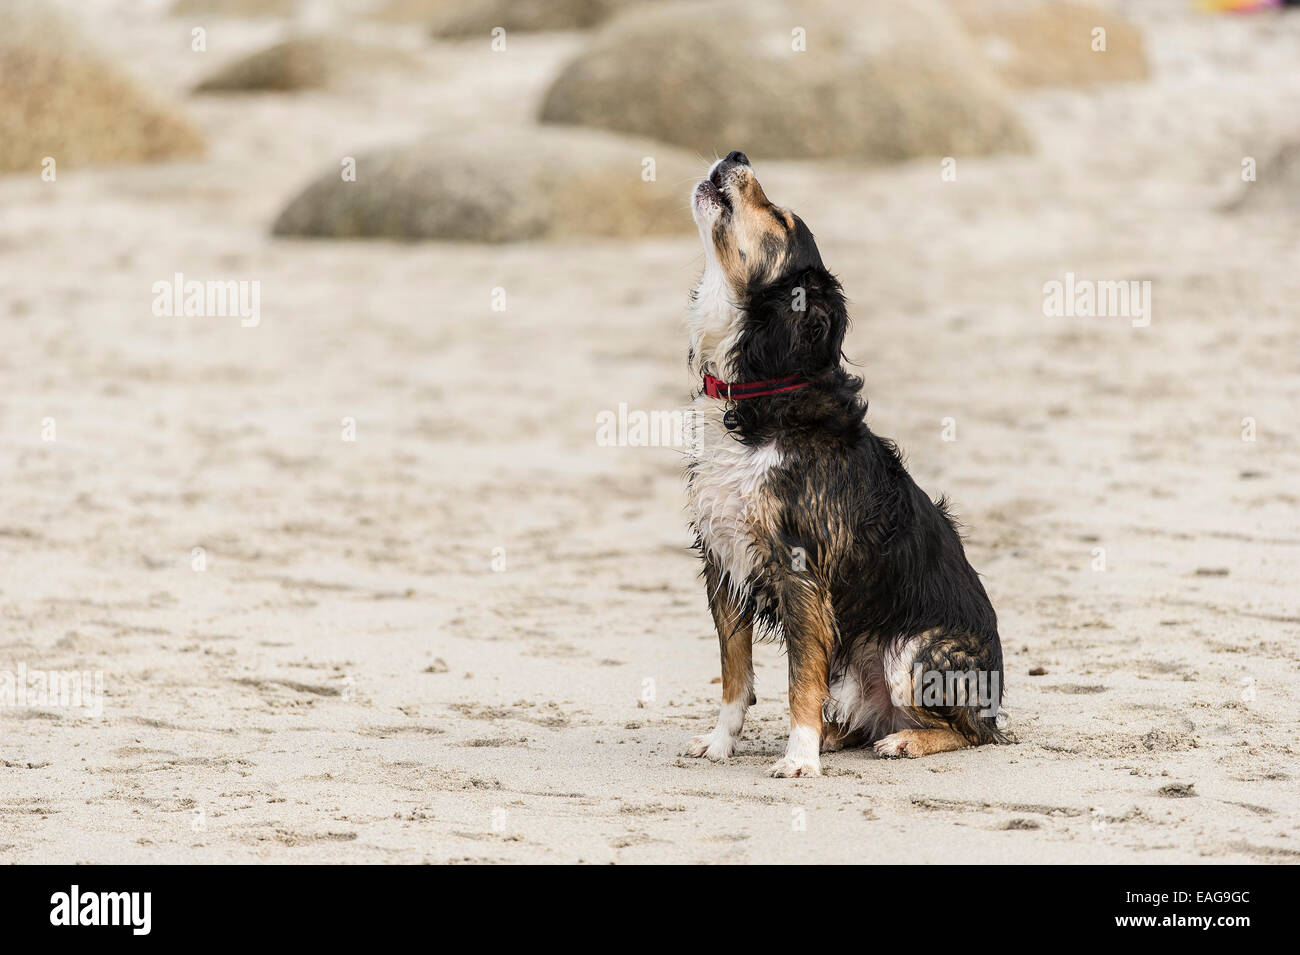 A dog howling on a beach. Stock Photo